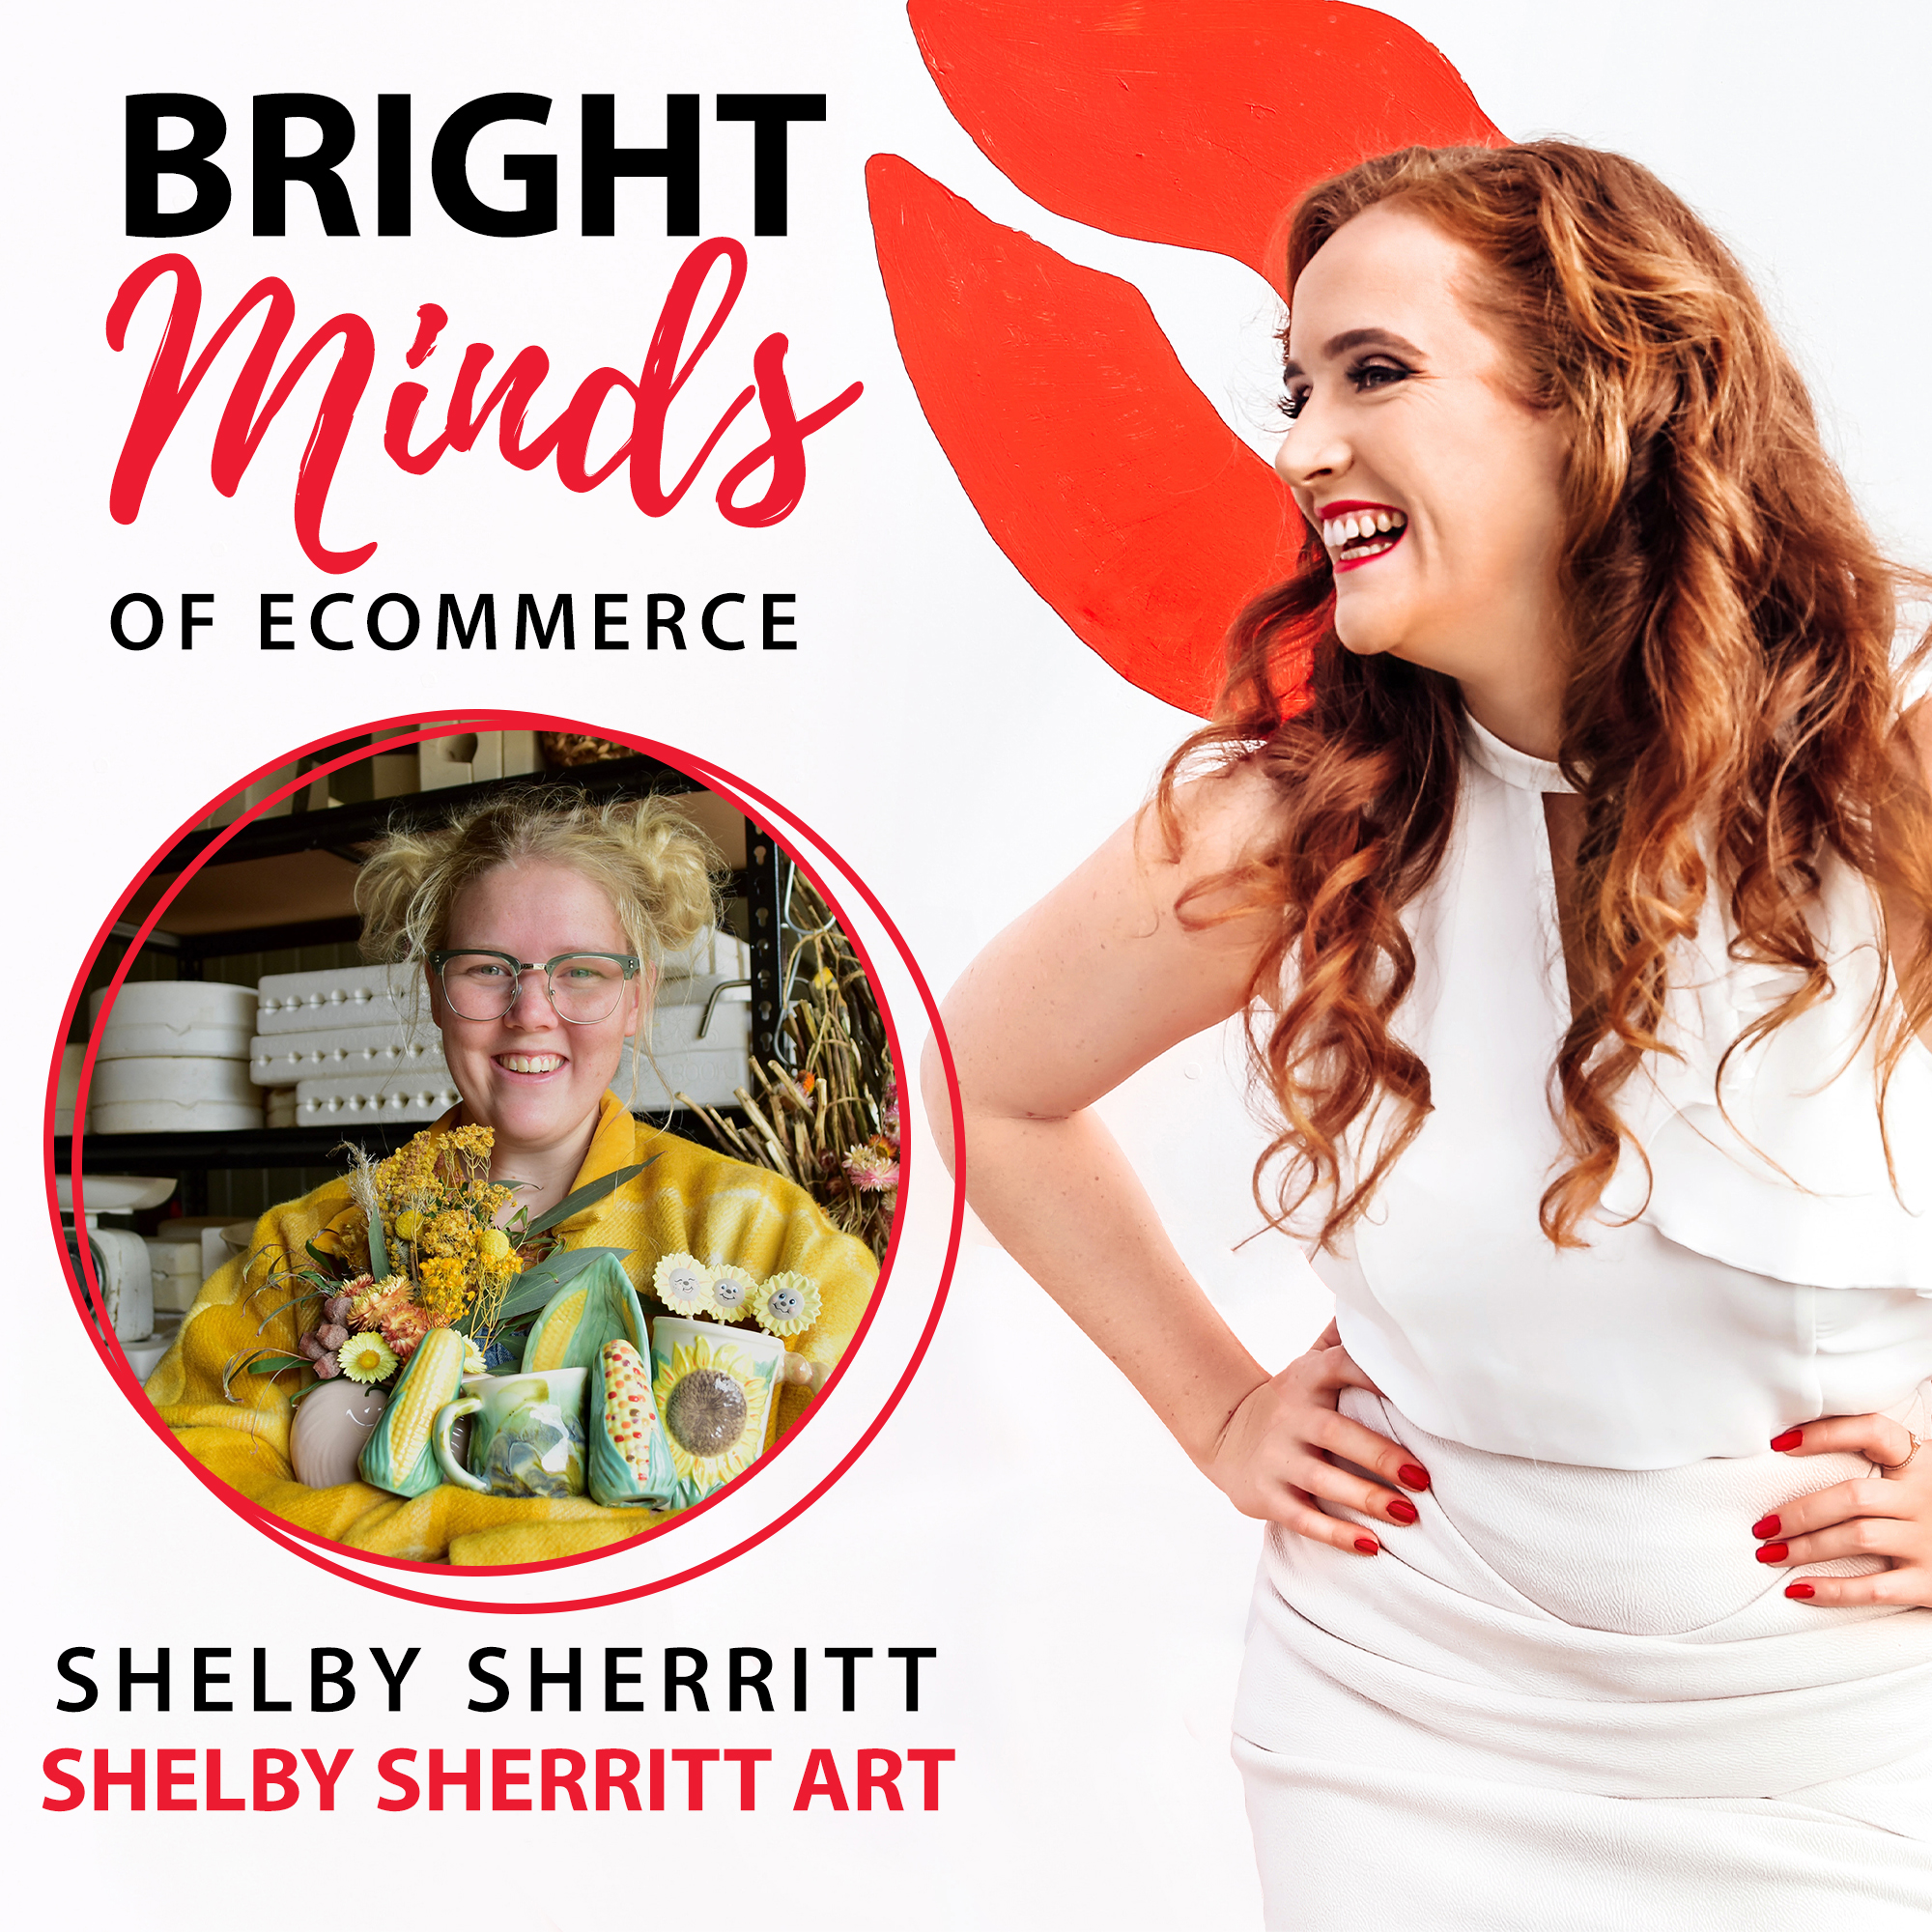 #19 The art of a creative business and how Shelby grew to over 1 Million TikTok Followers with Shelby Sherritt Art